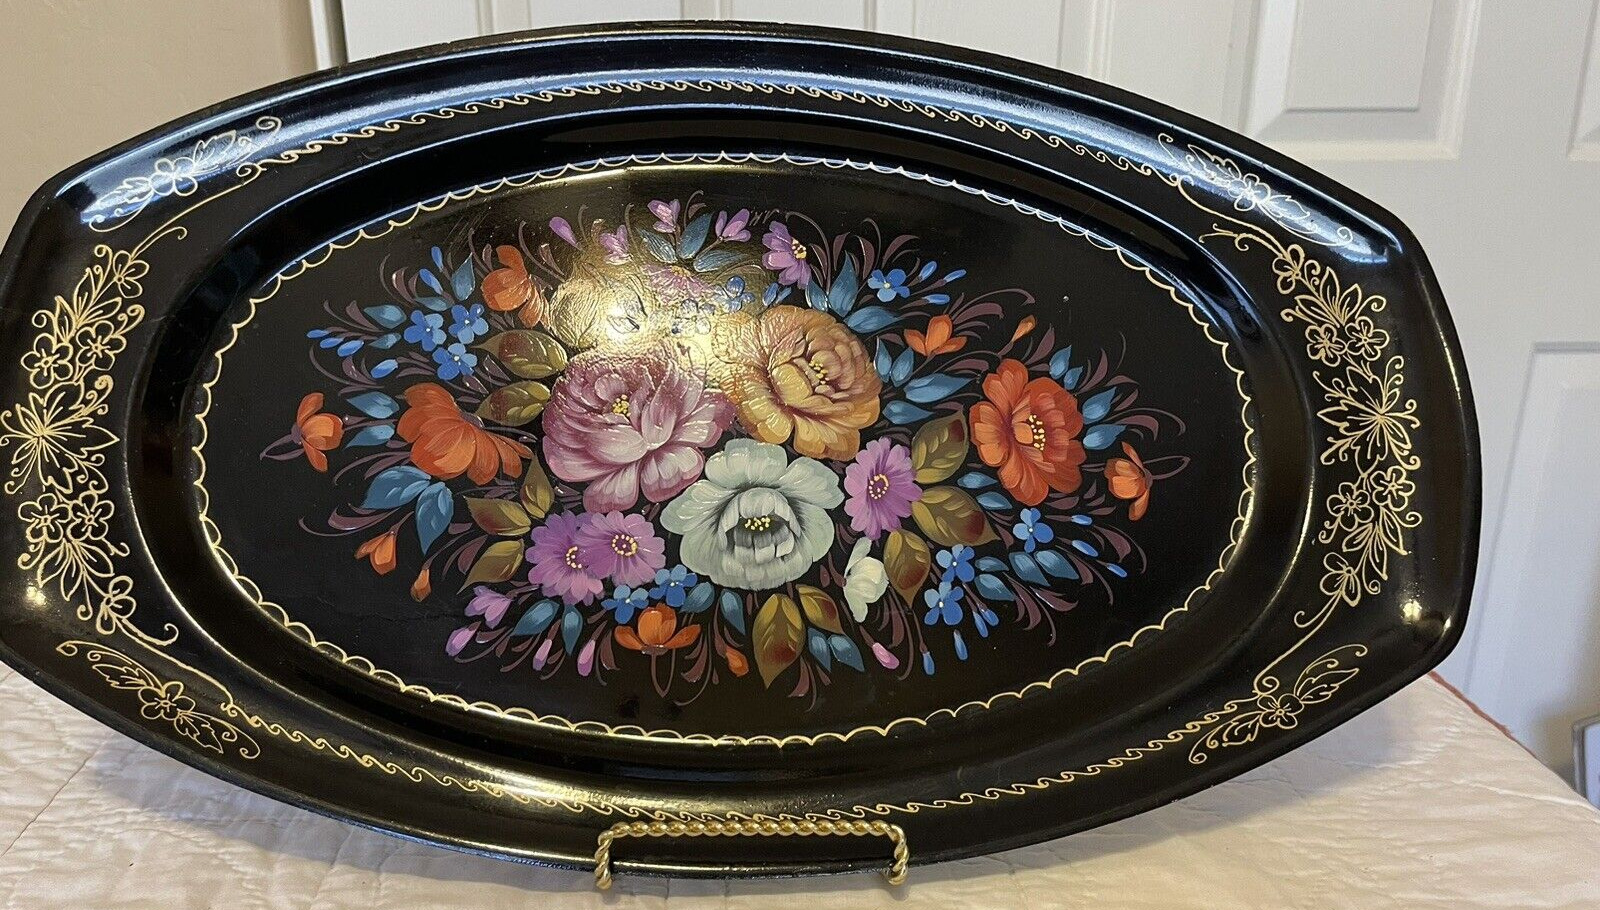 VTG Toleware Metal Tray Hand Painted Flowers with Black Gold Trim